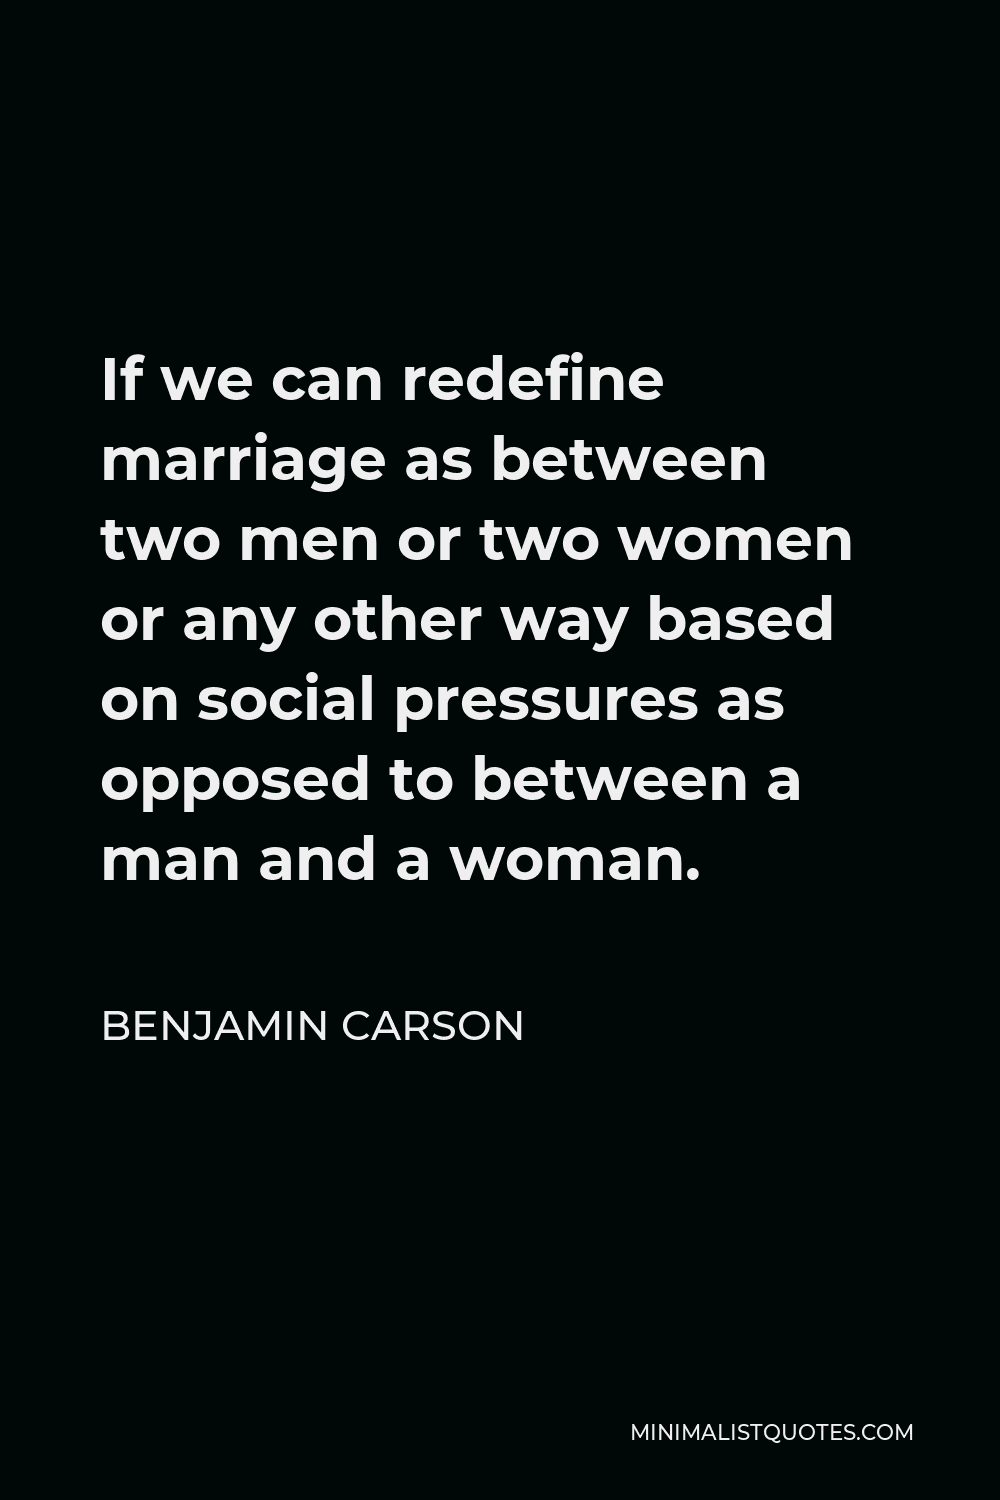 Benjamin Carson Quote - If we can redefine marriage as between two men or two women or any other way based on social pressures as opposed to between a man and a woman.